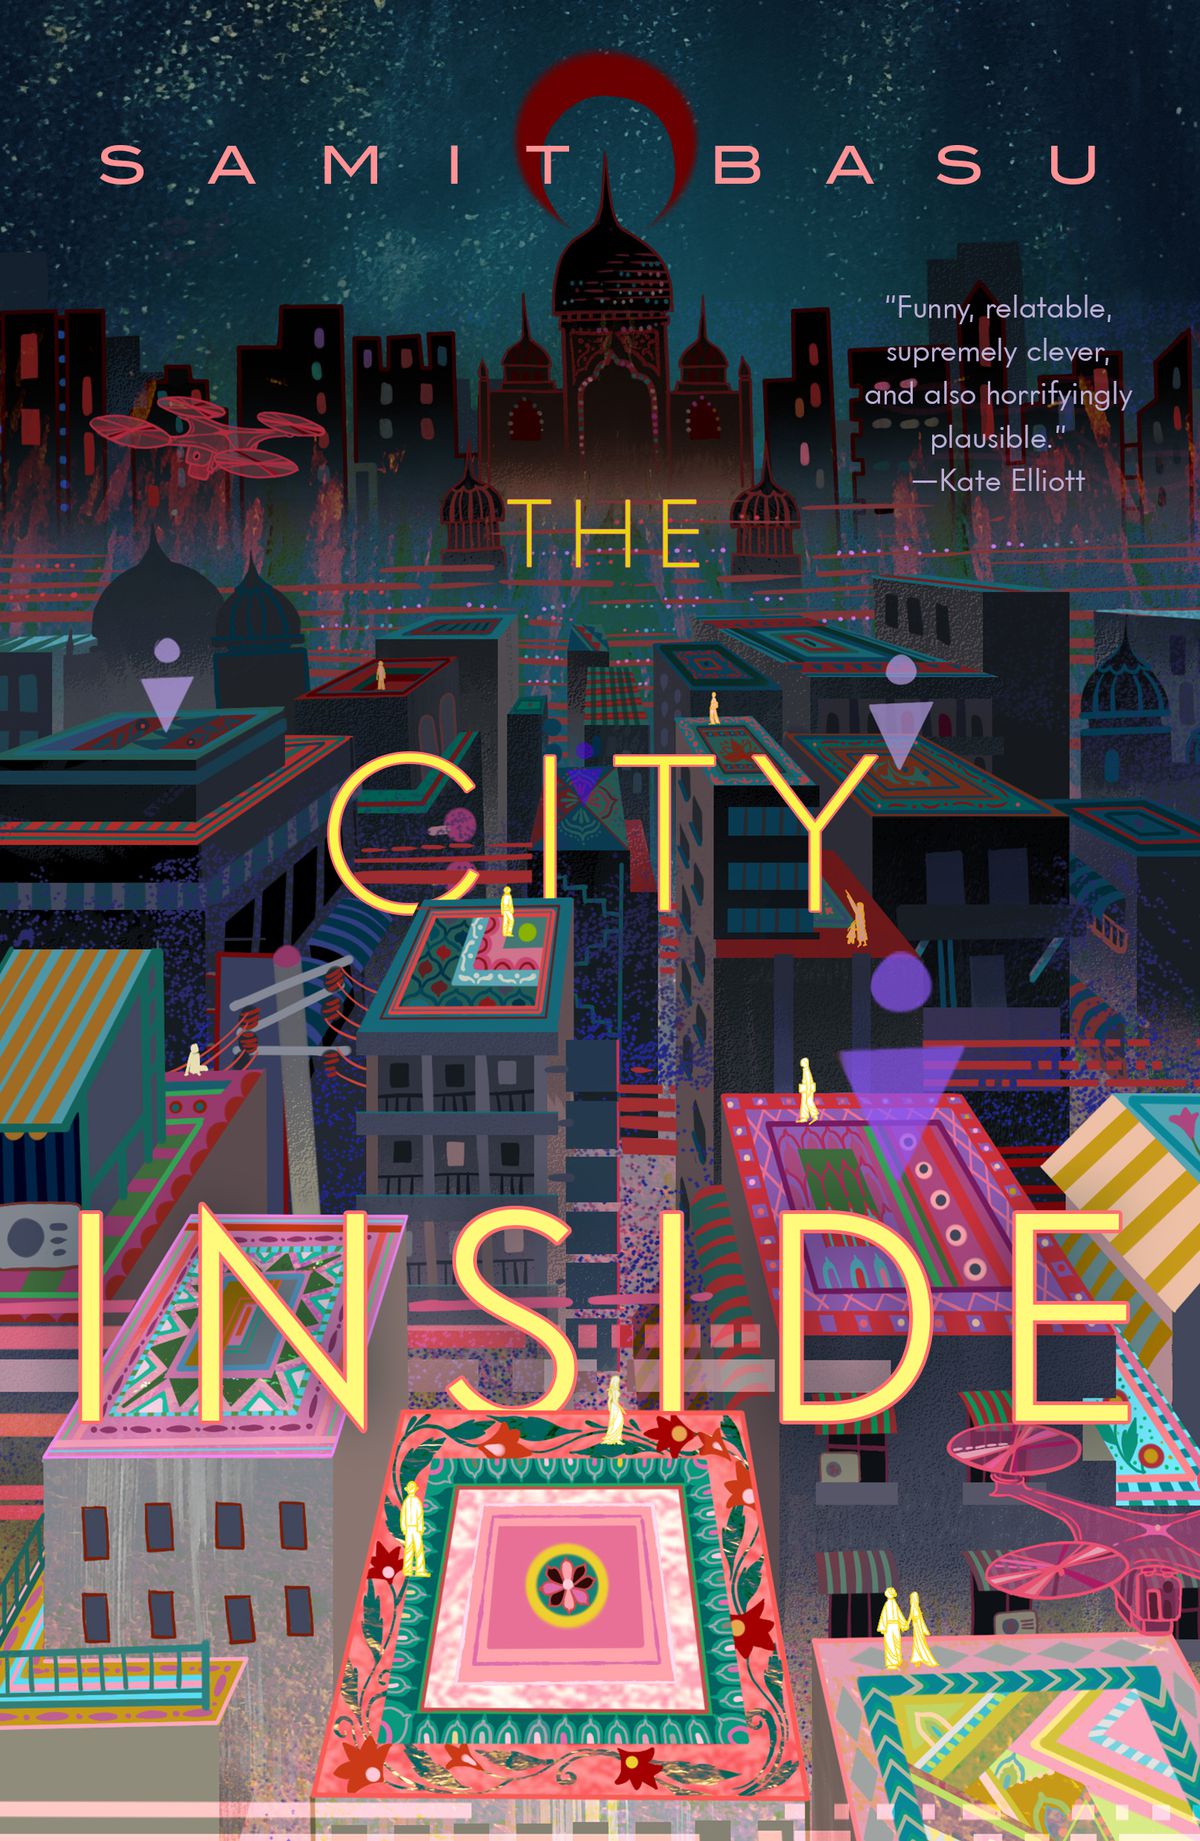 The cover for The City Inside showing a colorful illustration of a city